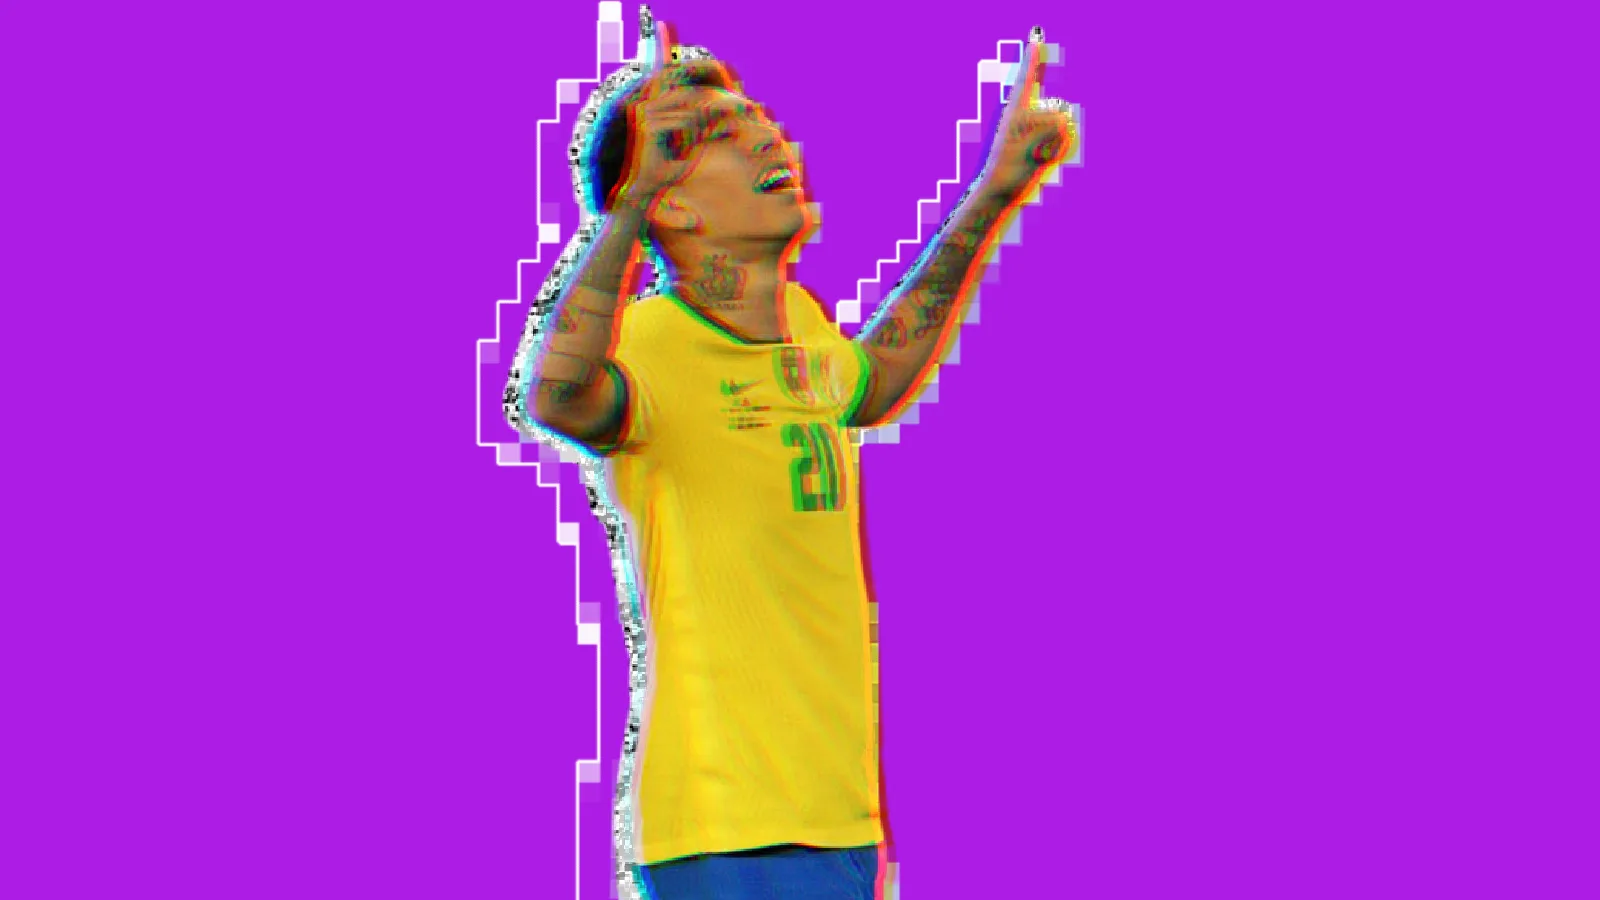 Roberto Firmino points to the gods after scoring a goal against Colombia